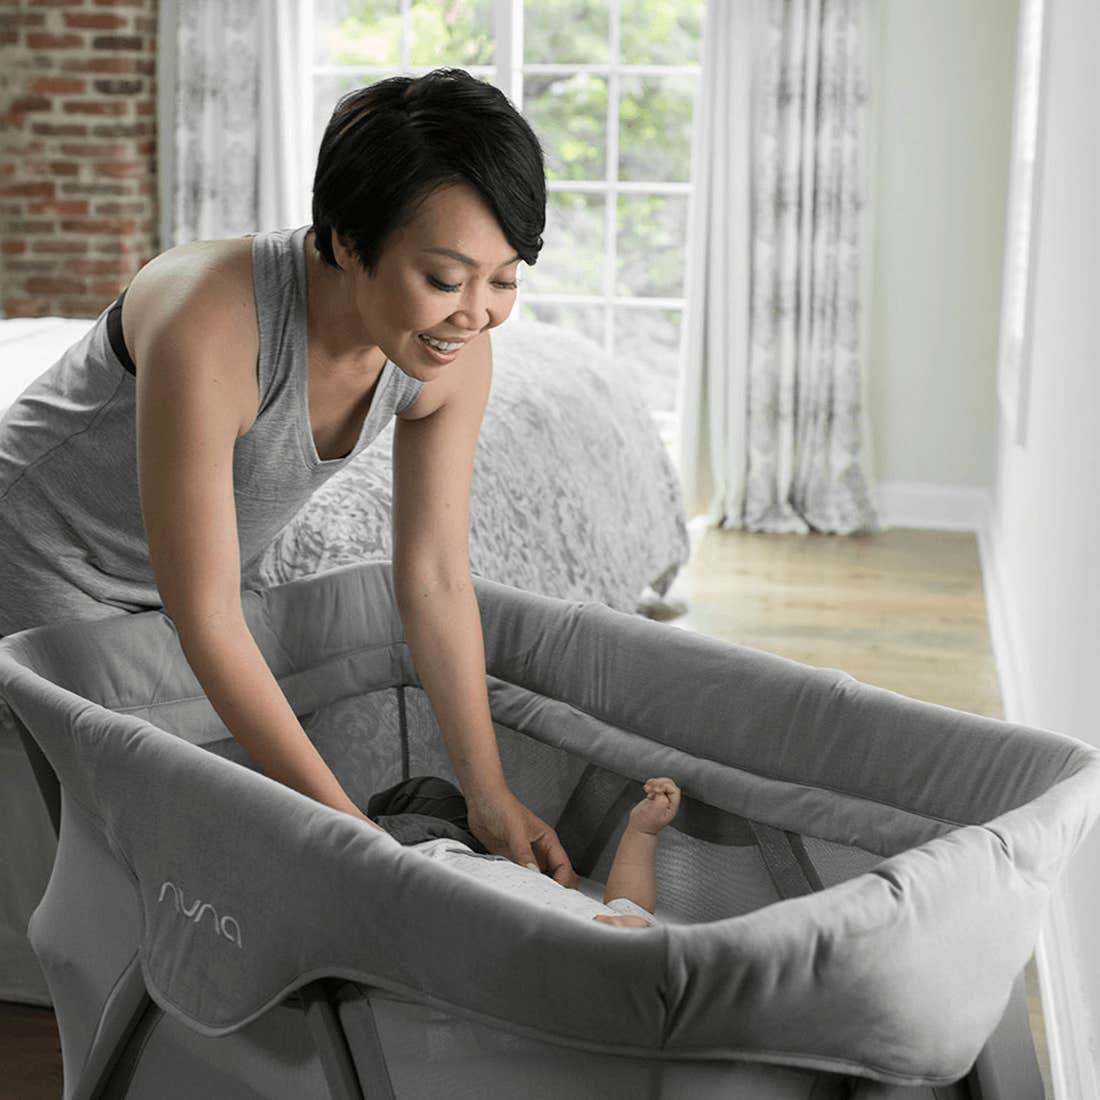 Nuna Cove Aire Go Playard, Frost - ANB Baby -$300 - $500